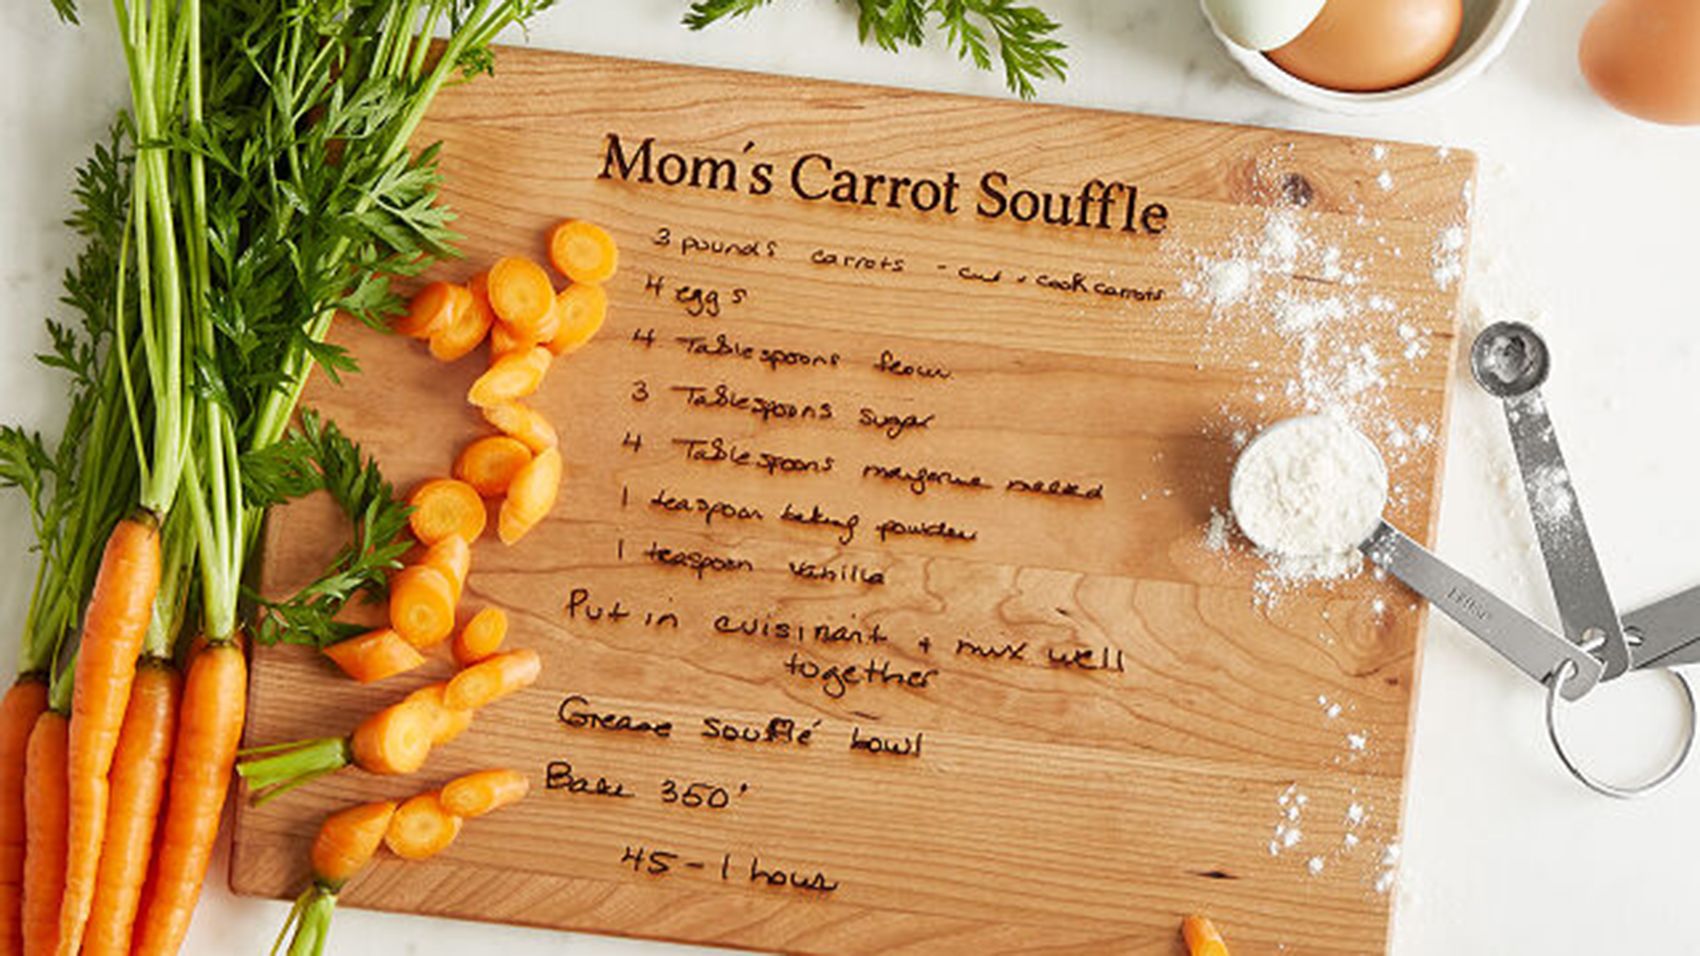 16 Proven Mother's Day Presents Ideas for Your Cooking Lover Mom